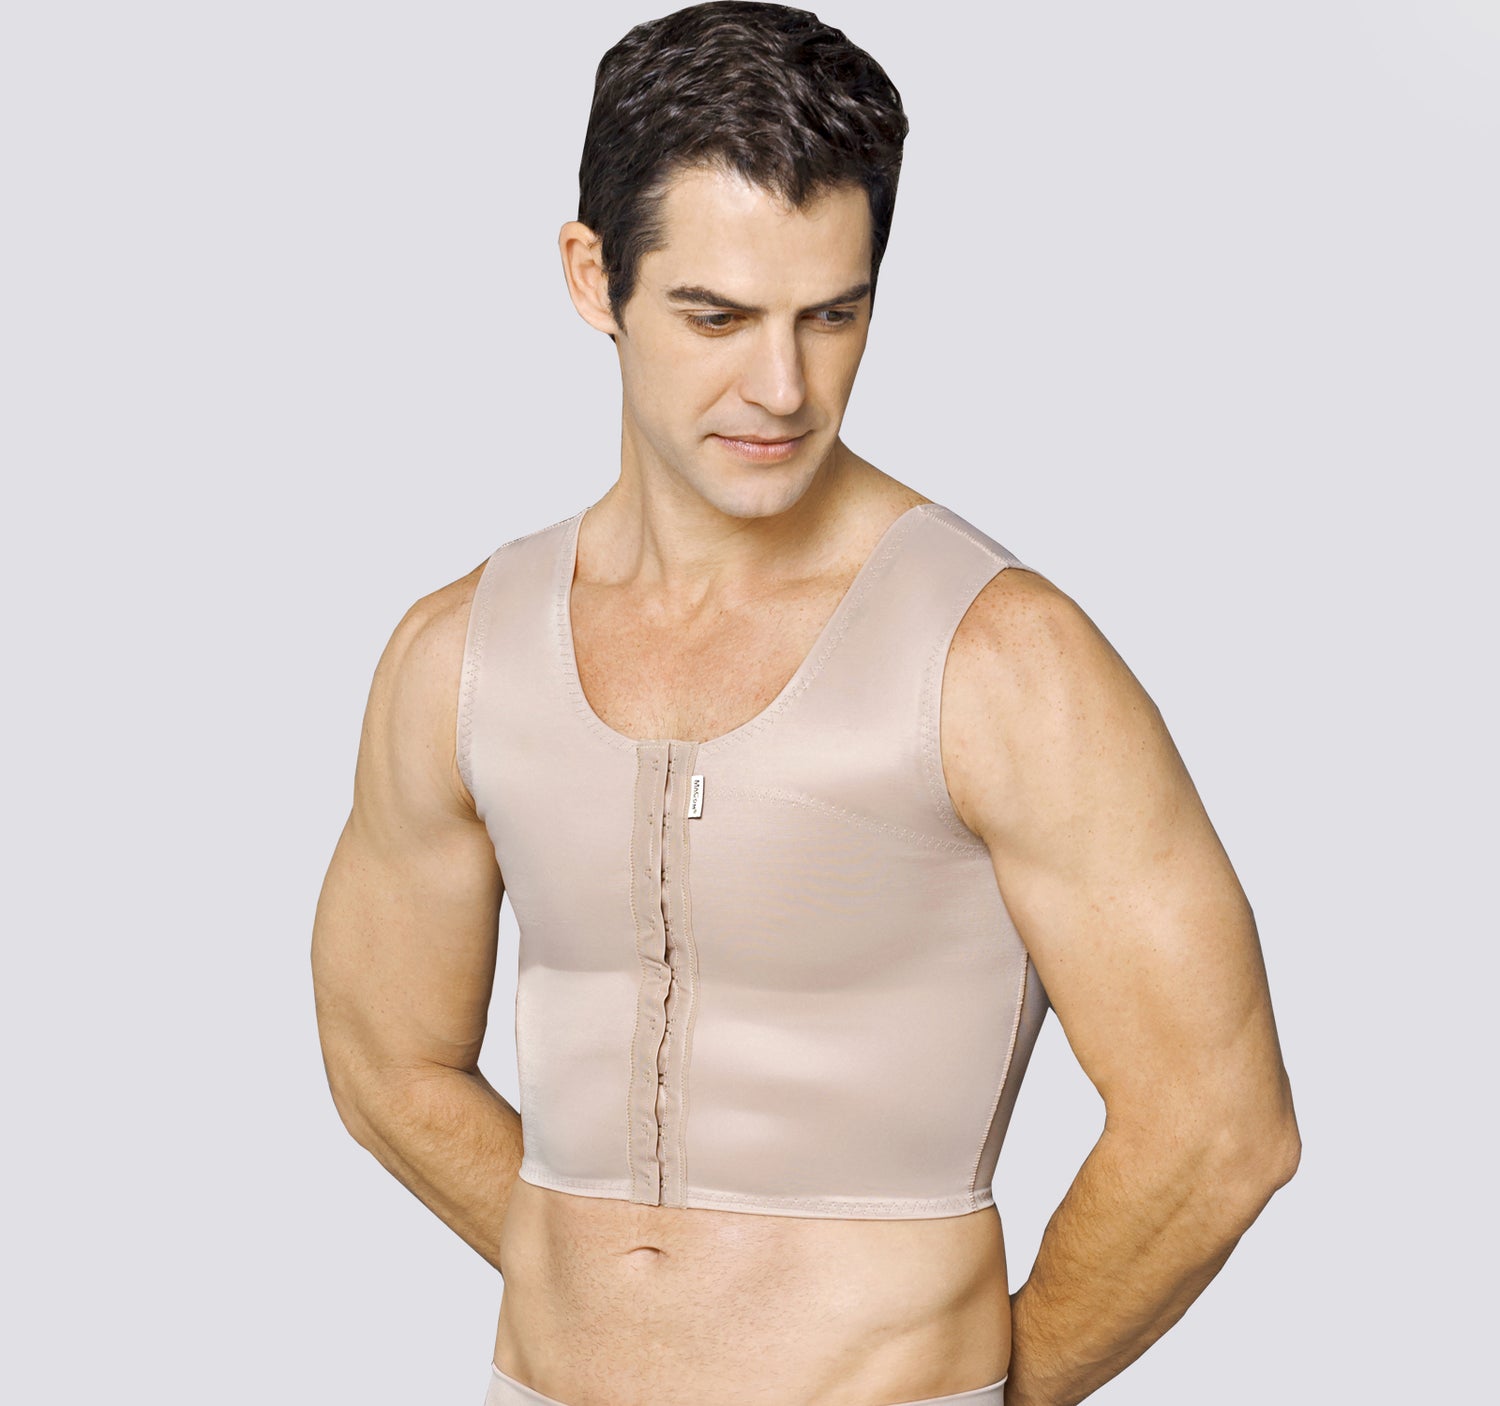 Shop men girdle for Sale on Shopee Philippines